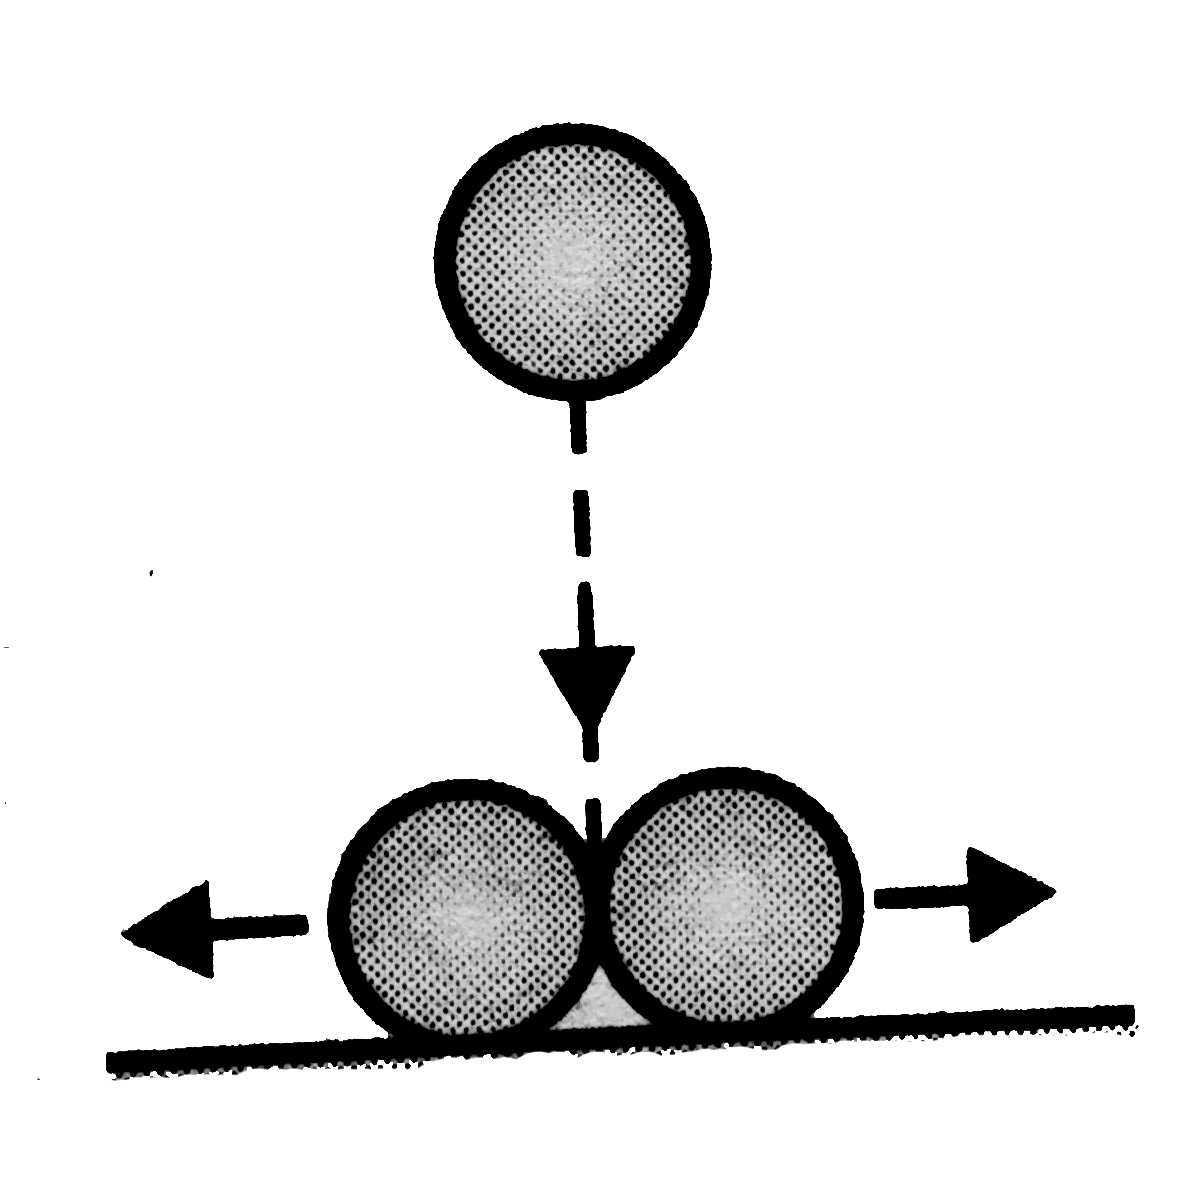 In the figure shown, the two identical balls of mass M and radius R each, are placed in contact with each other on the frictionless horizontal surface. The third ball of mass M and radius R//2, is coming down vertically and has a velocity = v(0) when it simultaneously hits the two balls and itself comes to rest. Then, each of the two bigger balls will move after collision with a speed equal to